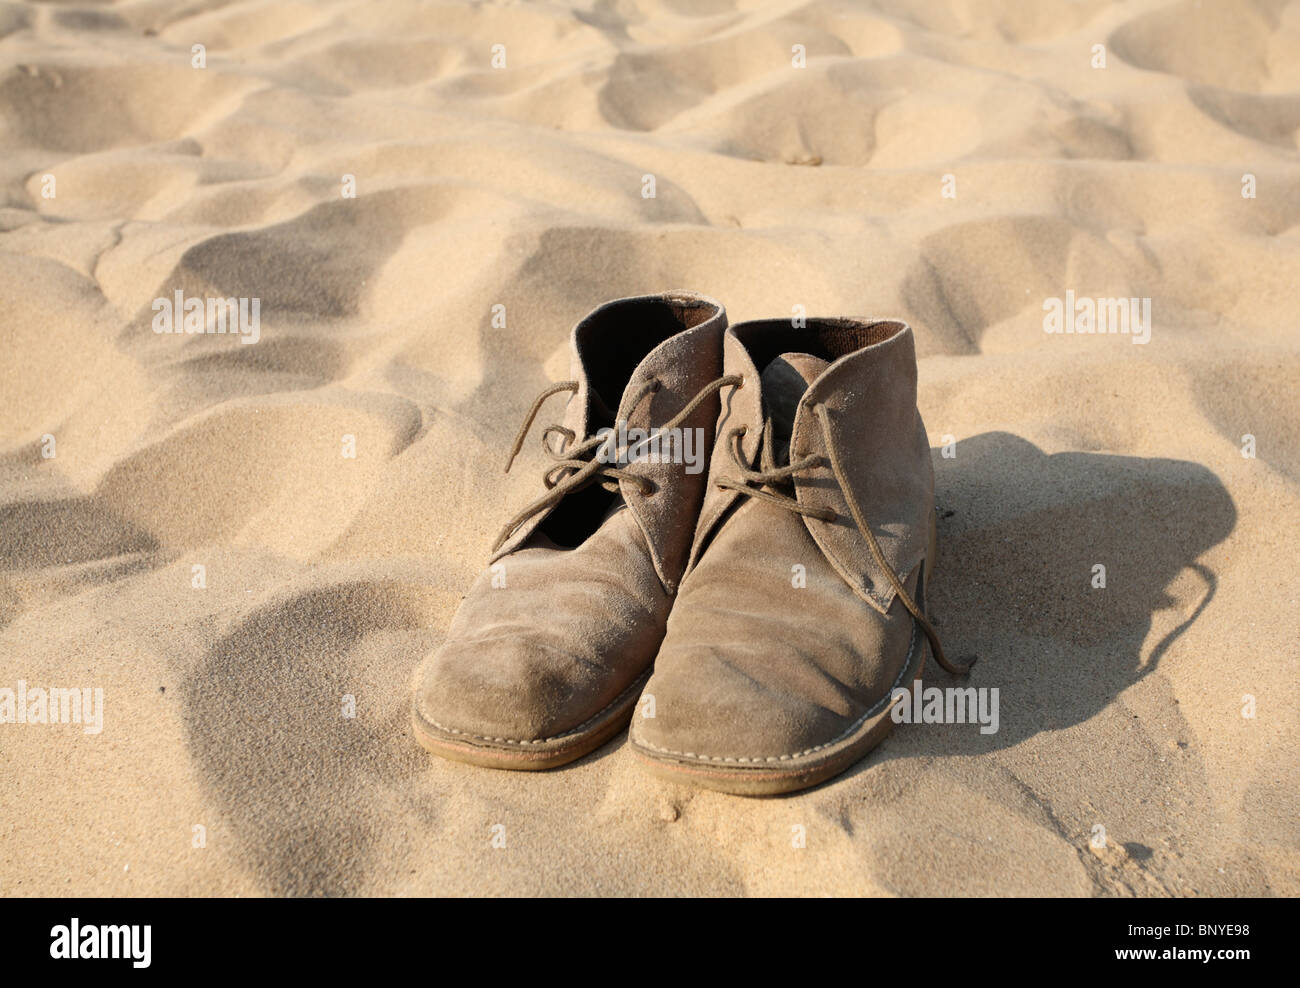 Suede Boots High Resolution Stock Photography and Images - Alamy